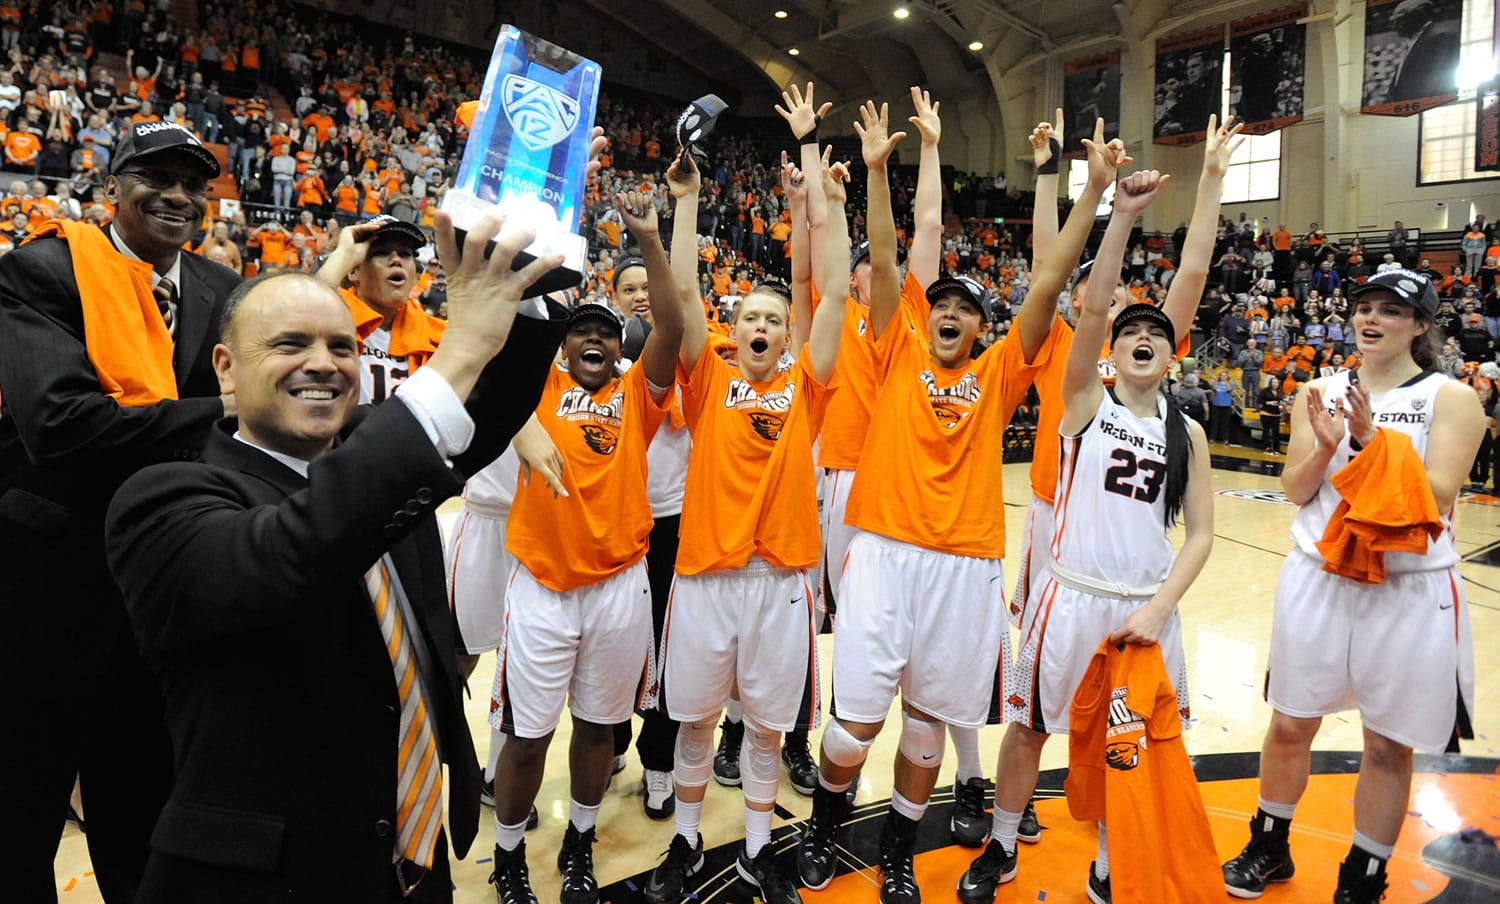 Oregon State head coach Scott Rueck hoists the Pac 12 Championship trophy while celebrating after the Beavers defeated California 73-55 at Gill Coliseum in Corvallis, Ore. on Saturday, Feb. 28, 2015.